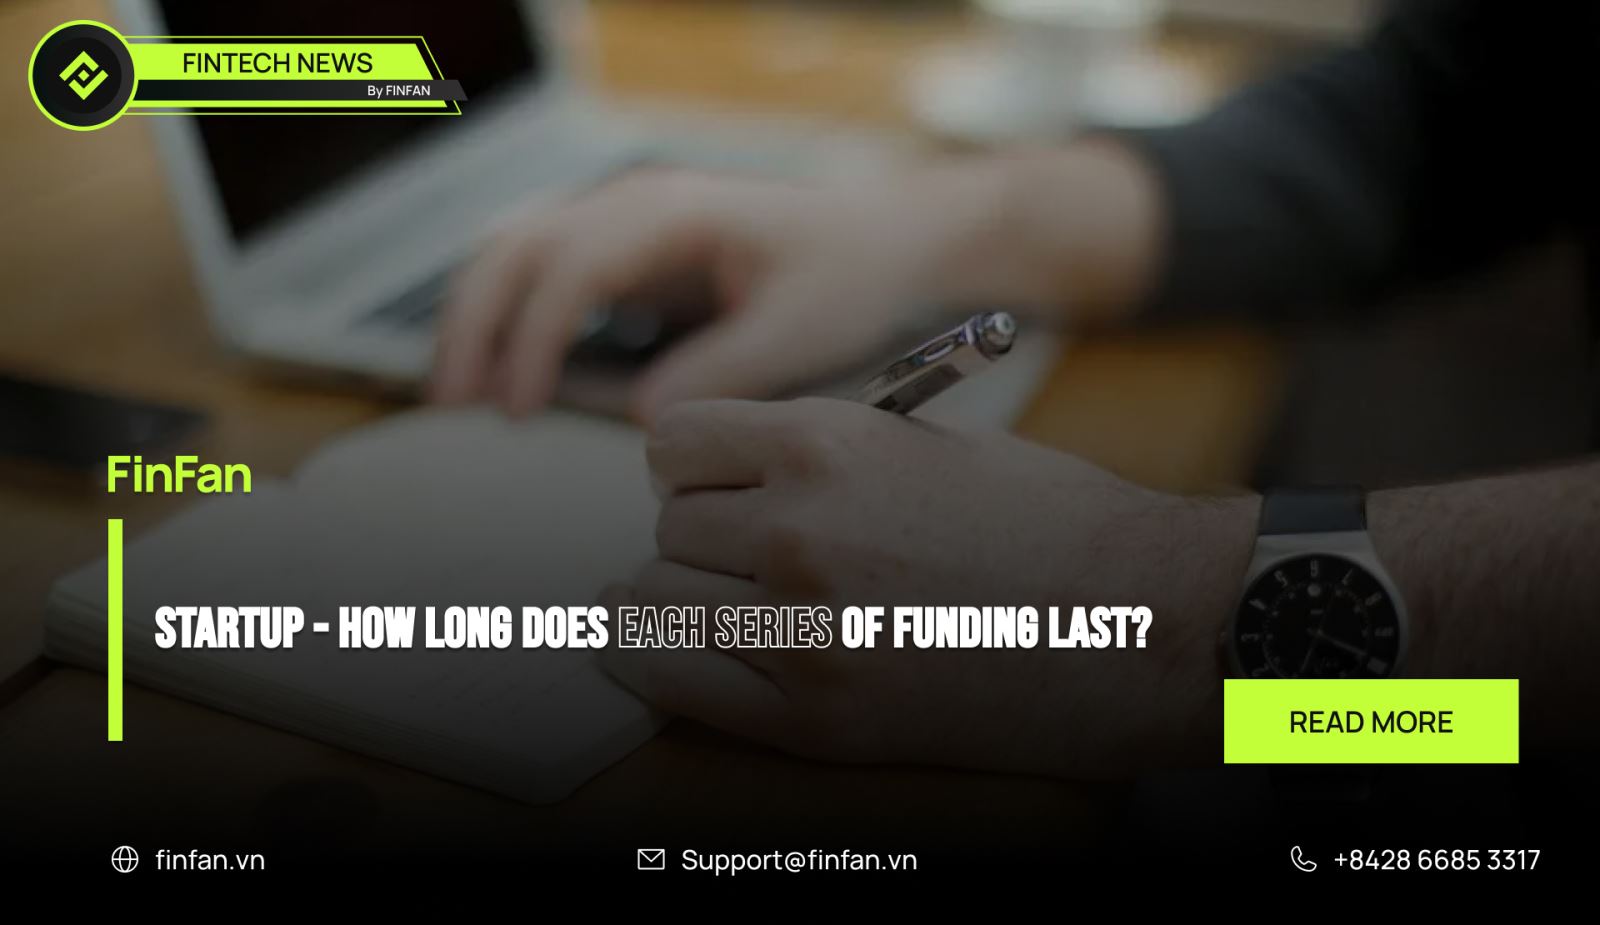 How long does each series of funding last?